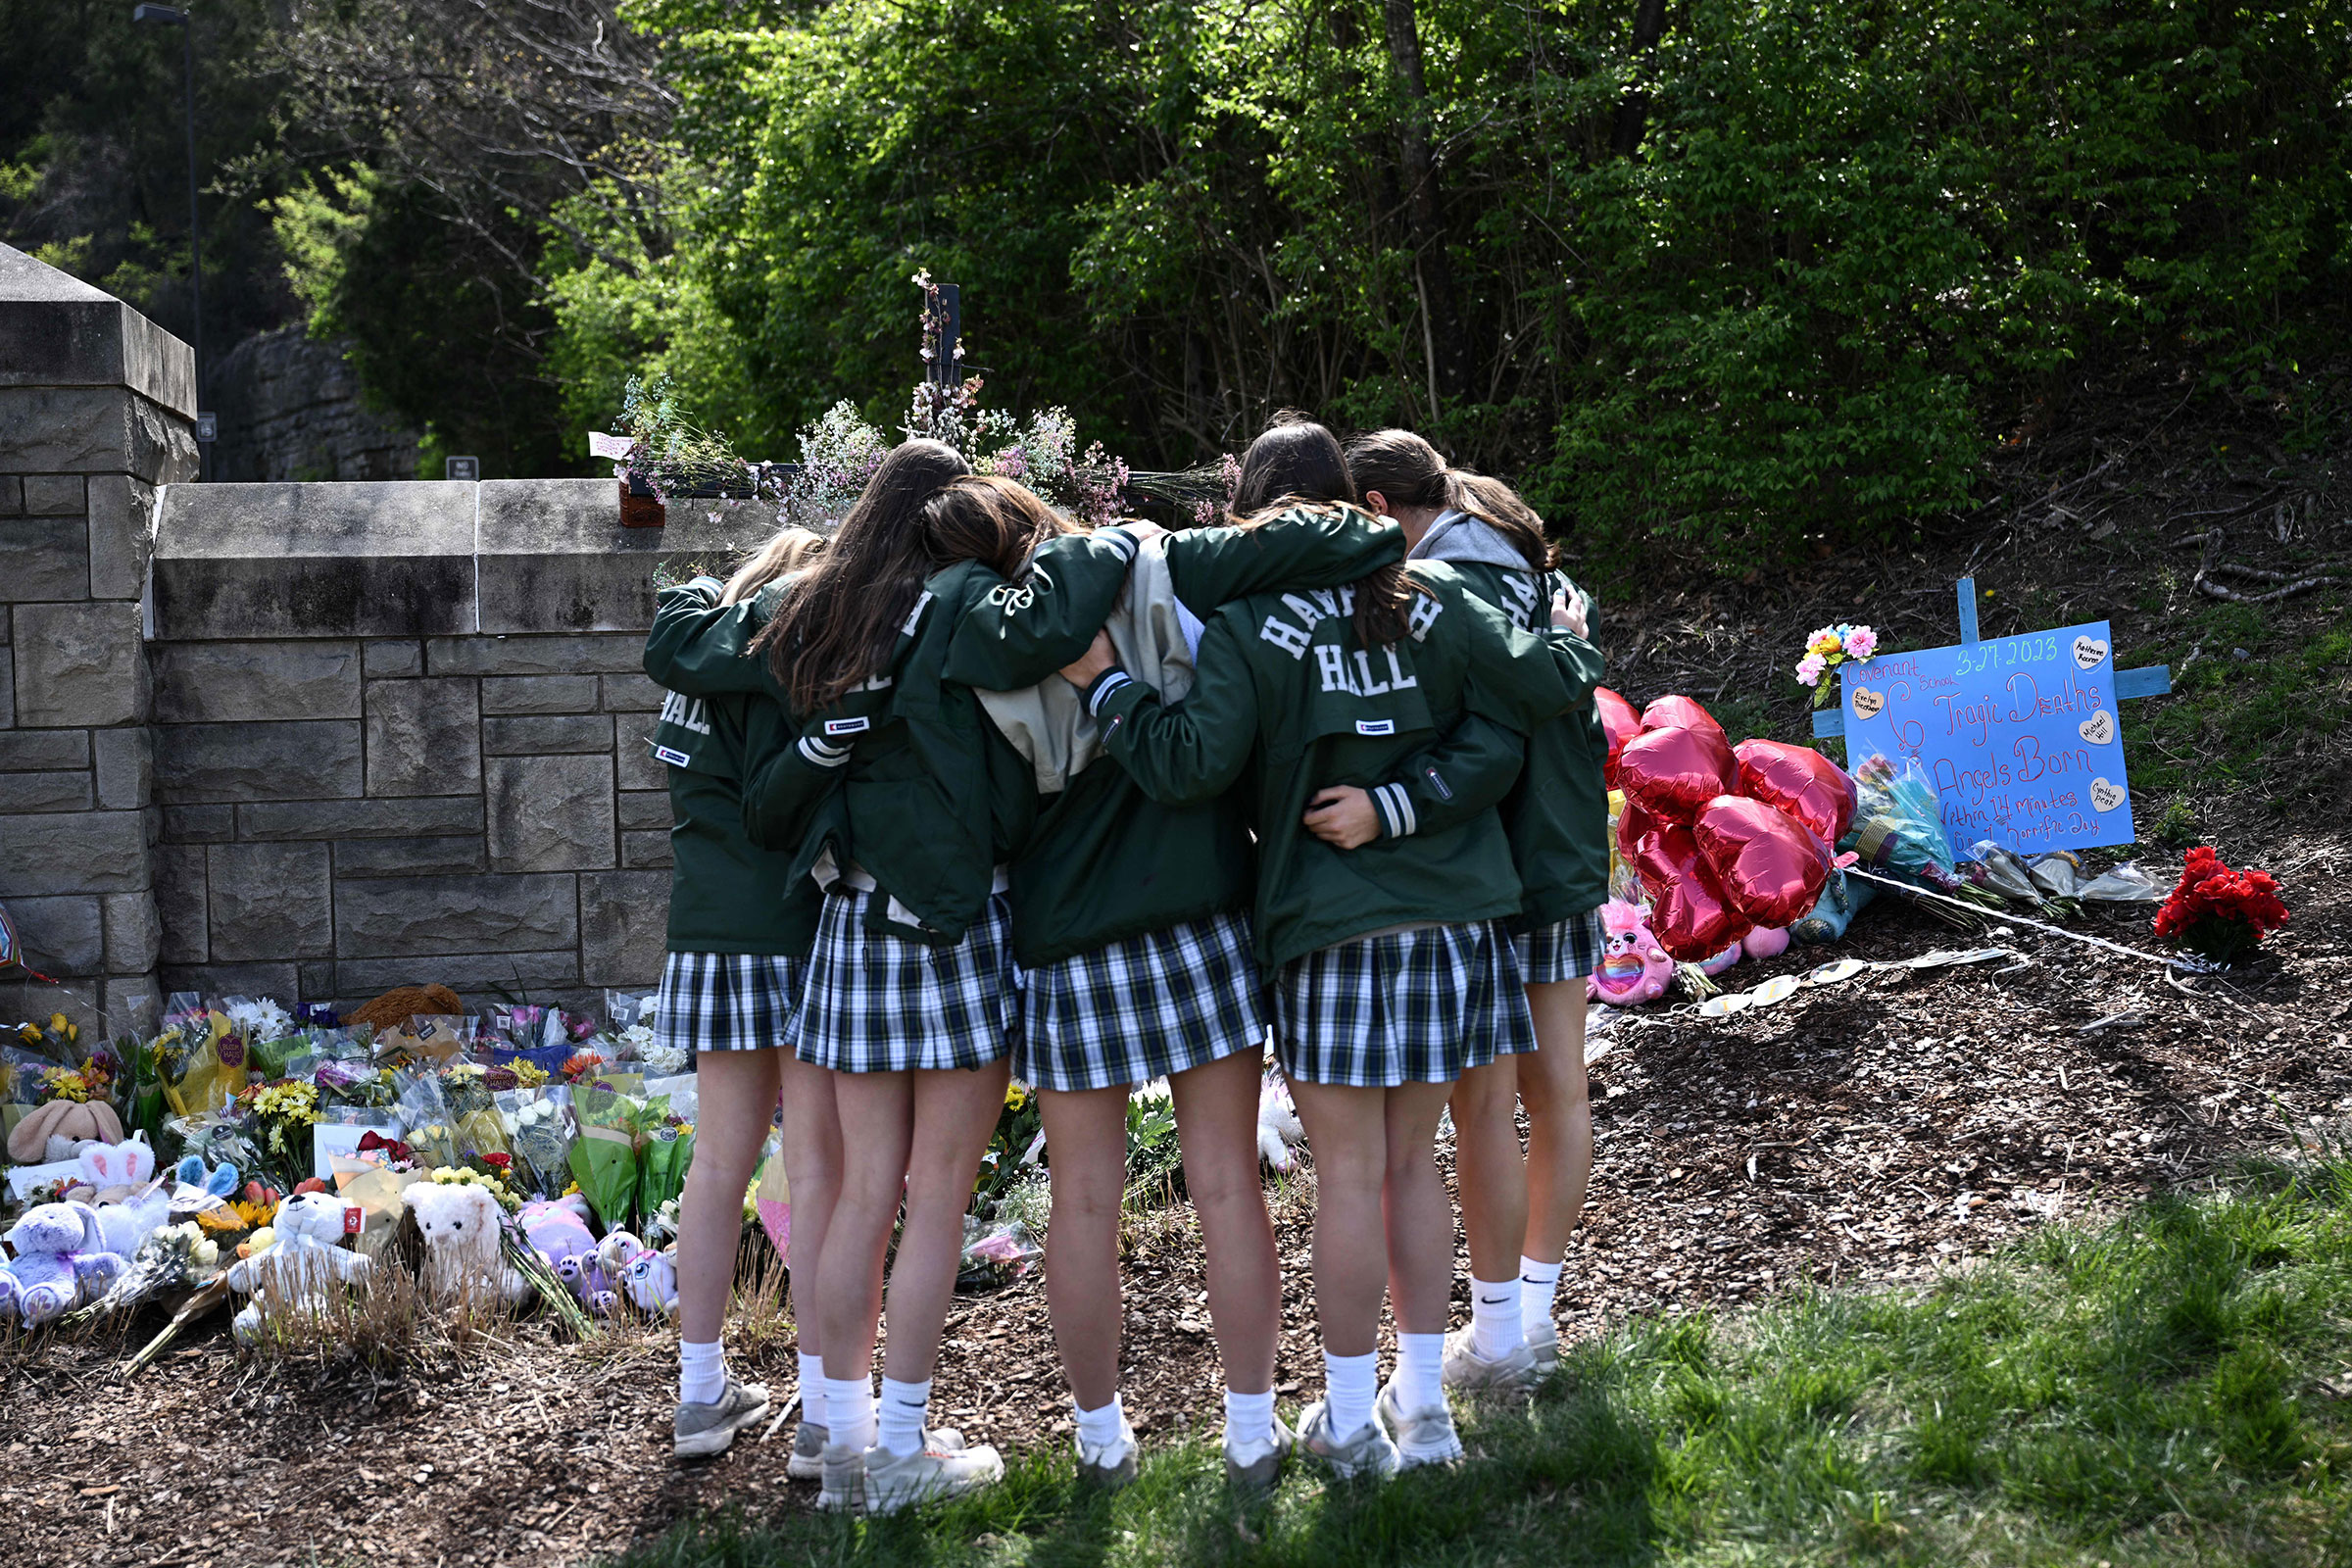 A group of girls embrace in front of a makeshift memorial for victims by the Covenant School building at the Covenant Presbyterian Church following a shooting, in Nashville, Tenn., on March 28.